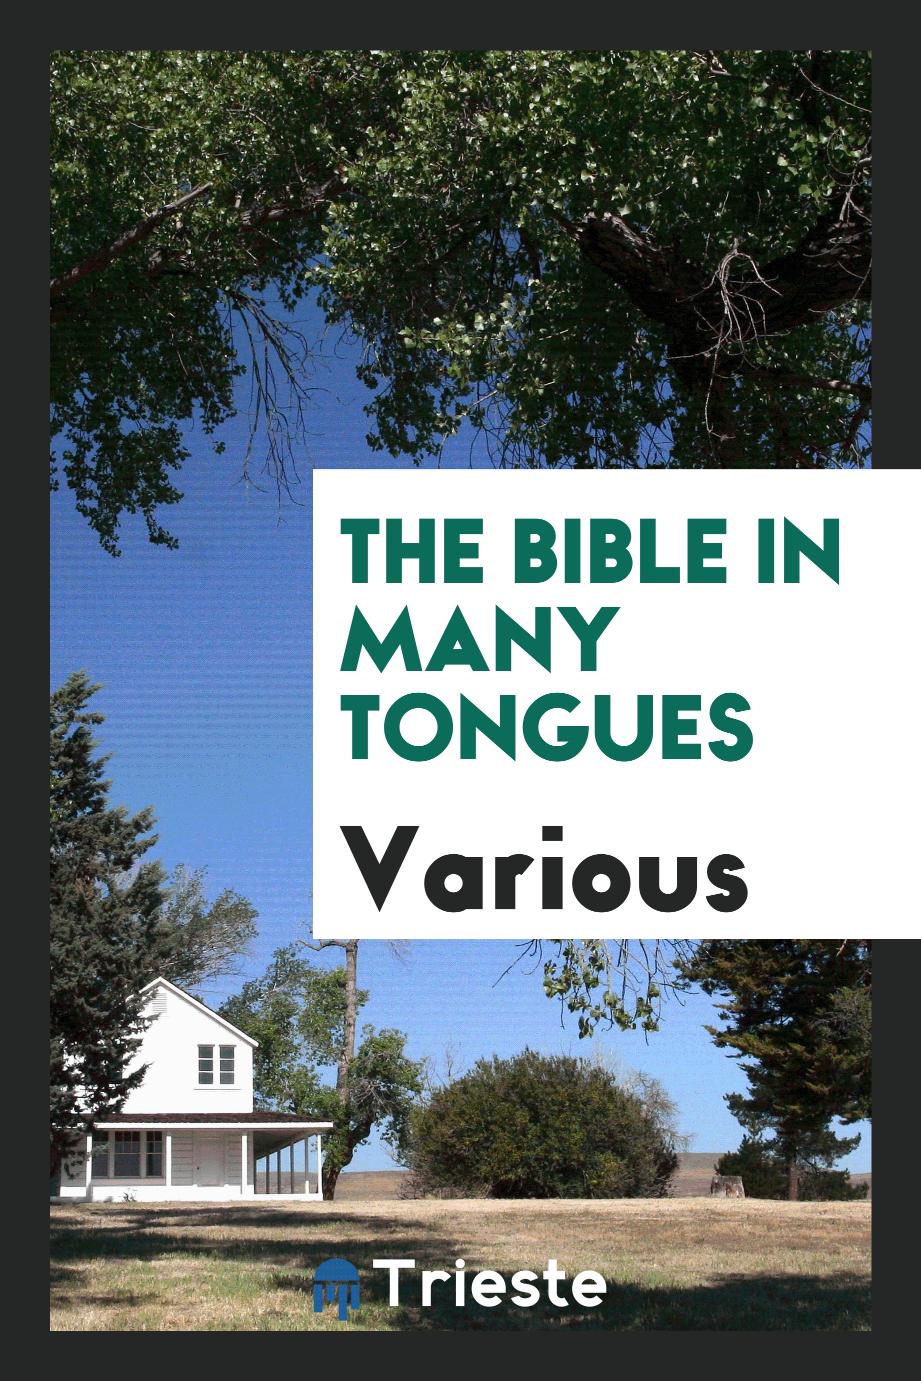 The Bible in many tongues